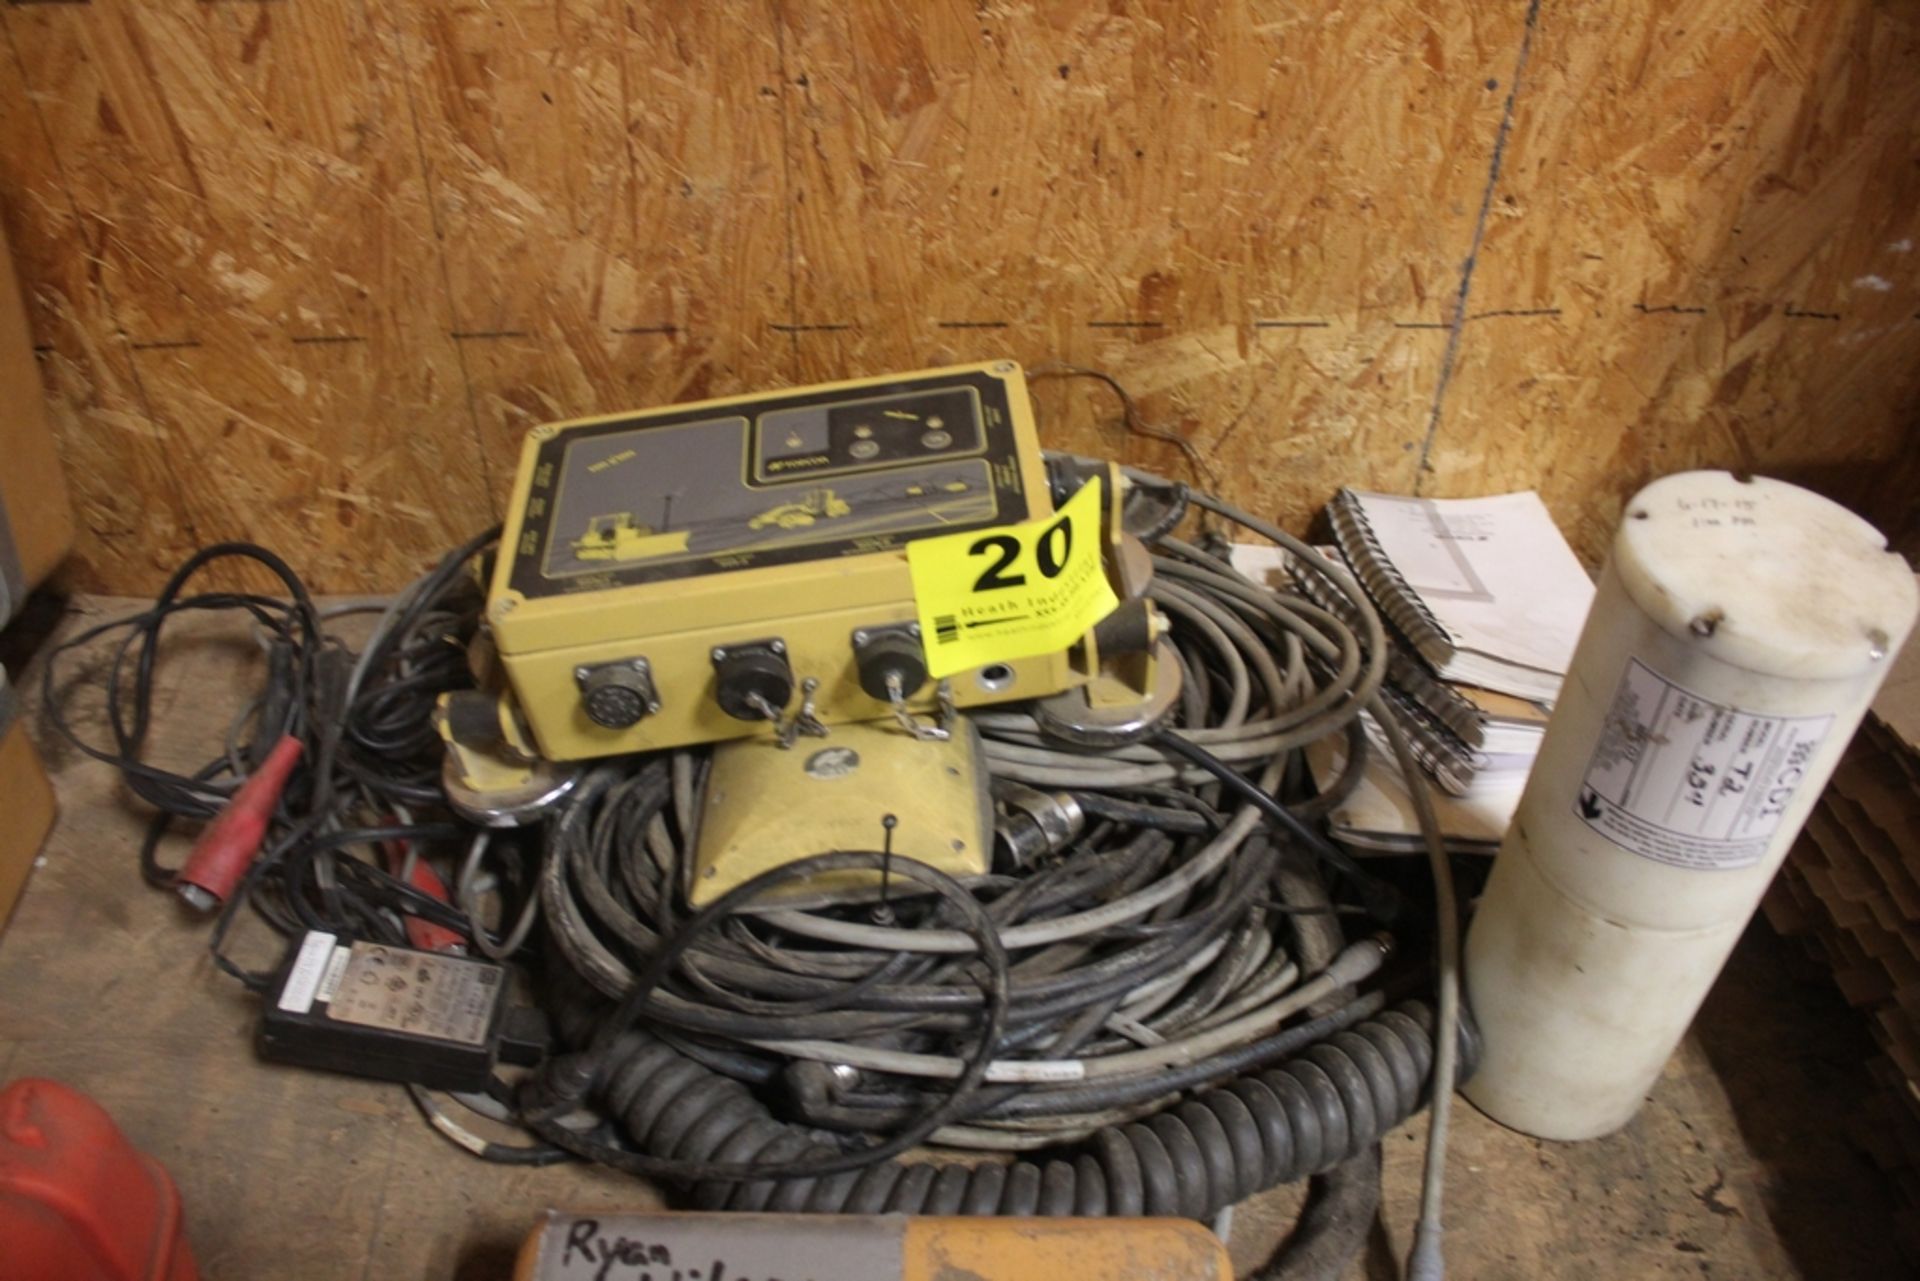 TOPCON UHF DUAL ANTENNA 3D GPS MACHINE CONTROL, WITH ASSORTED CABLES, ETC.